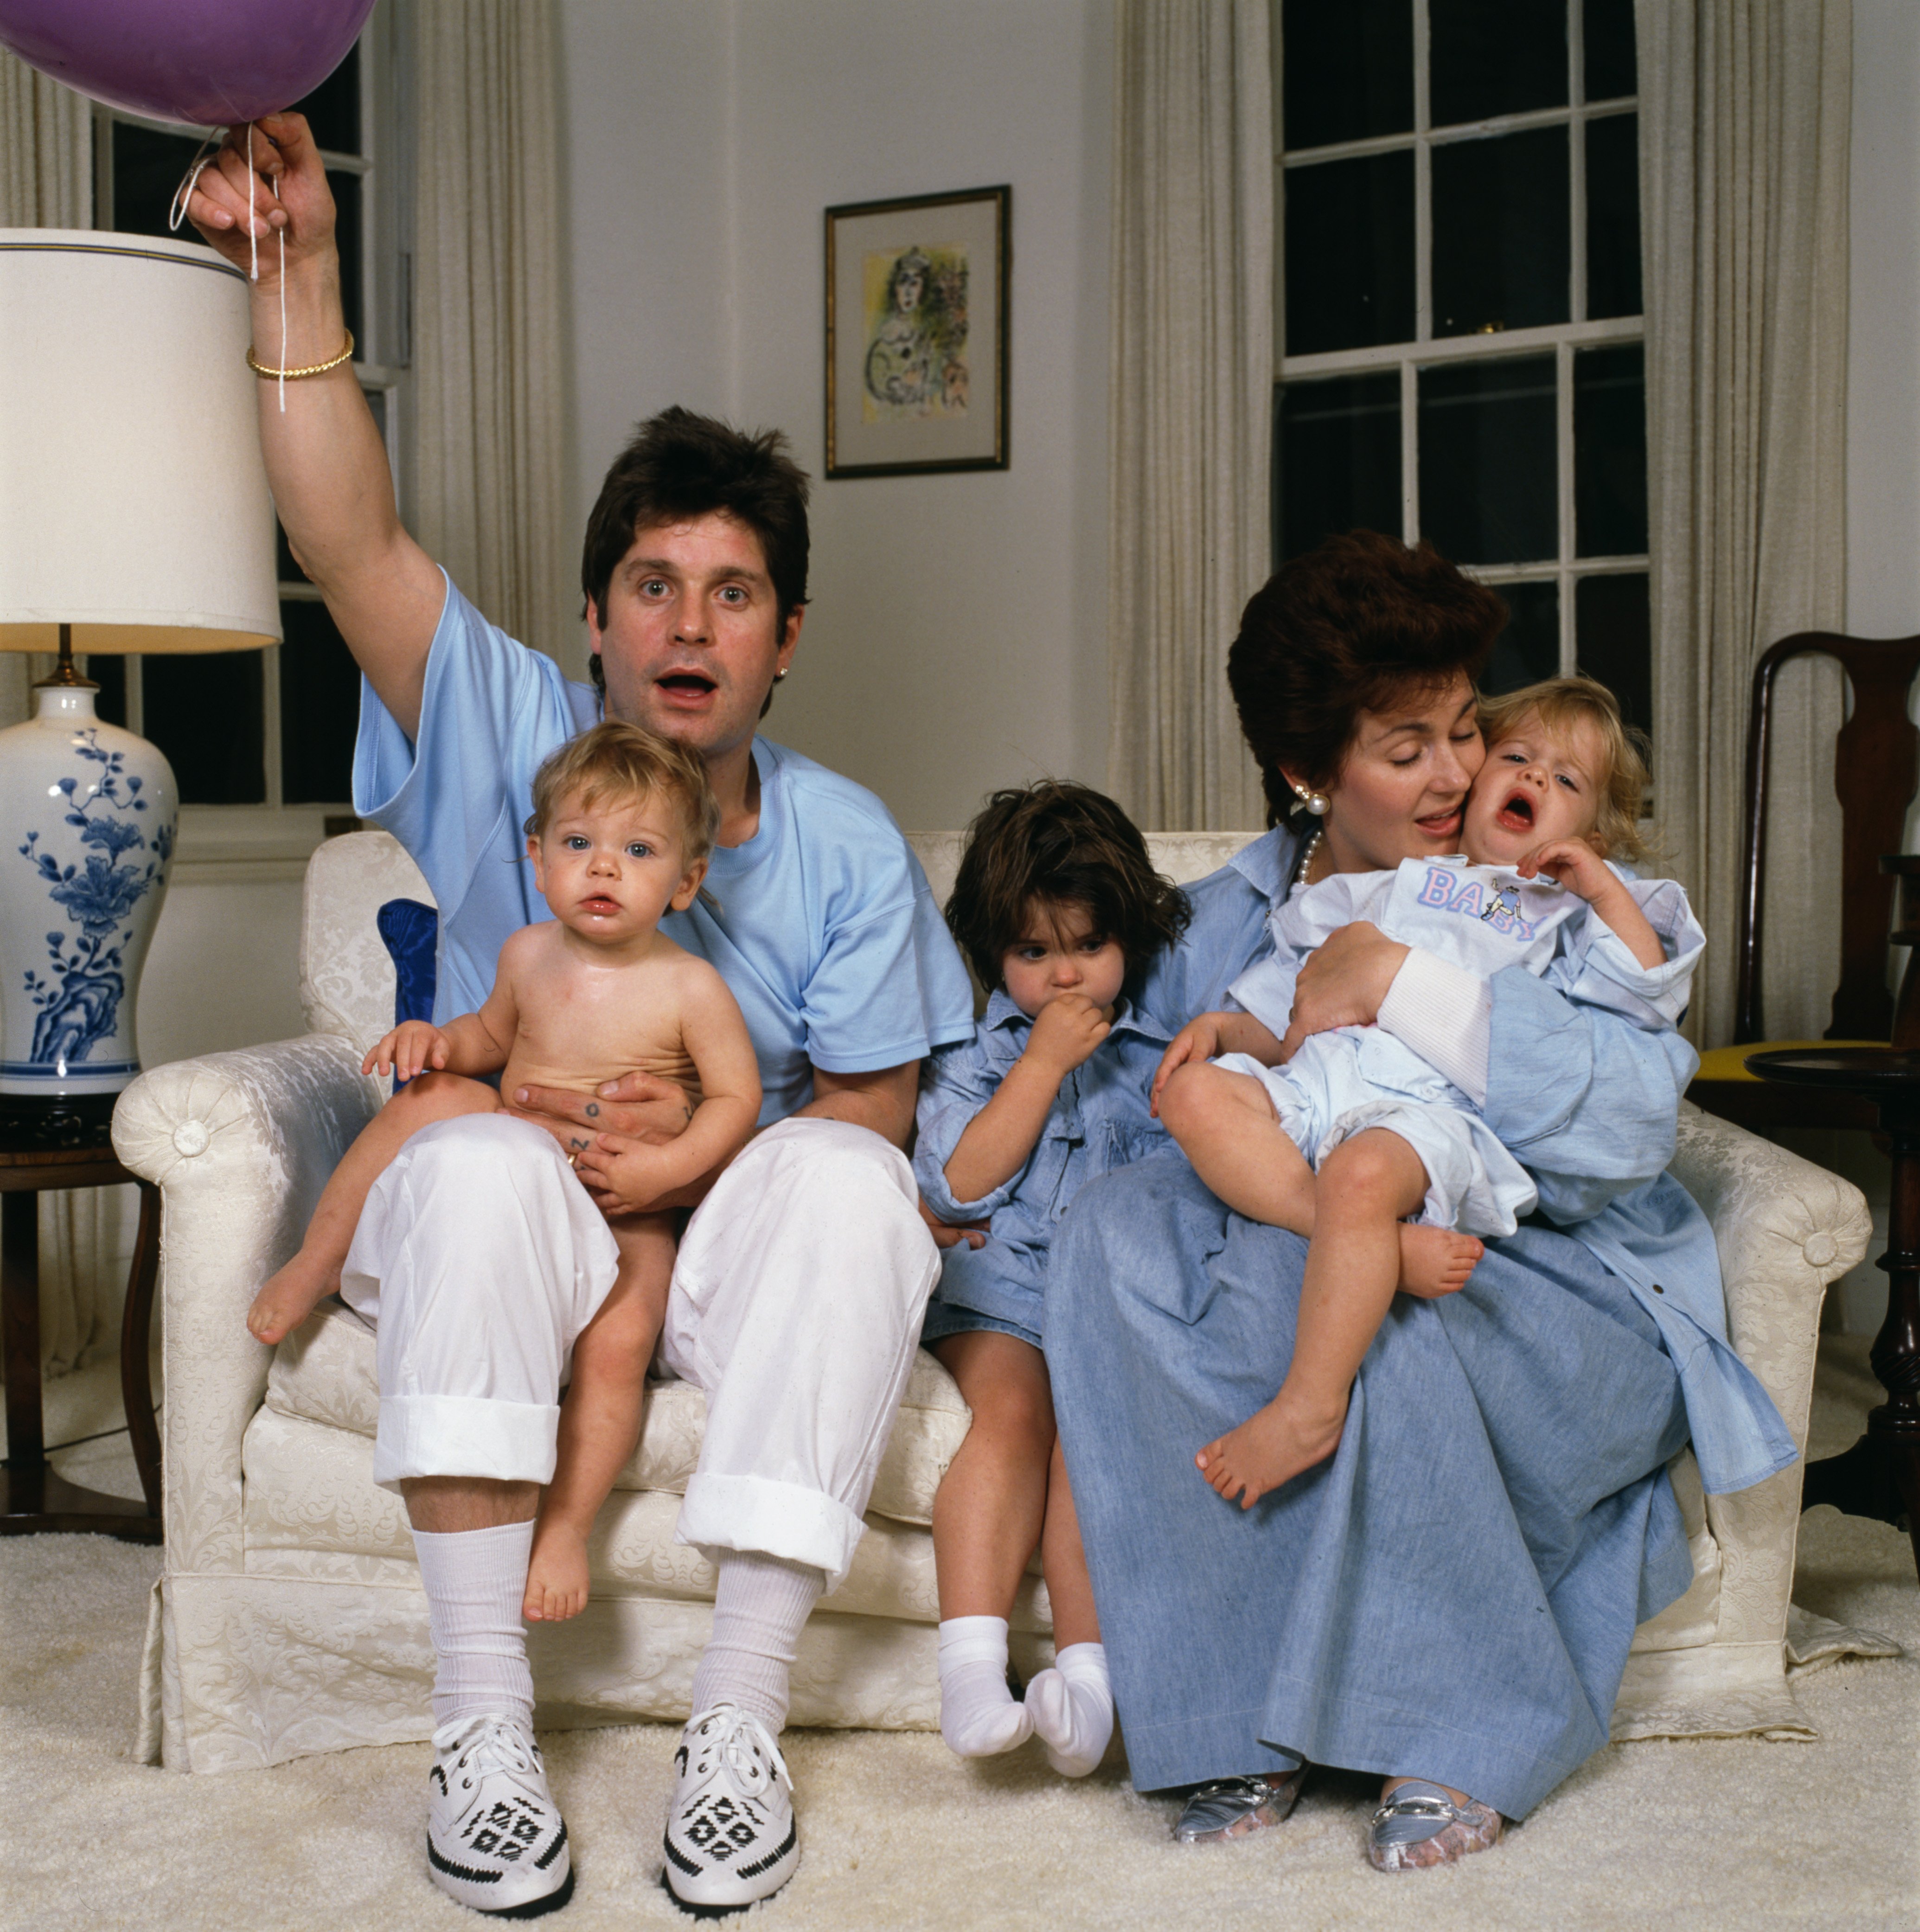 Ozzy Osbourne and his wife Sharon and their children Aimee, Kelly and Jack, USA, 1987 | Source: Getty Images